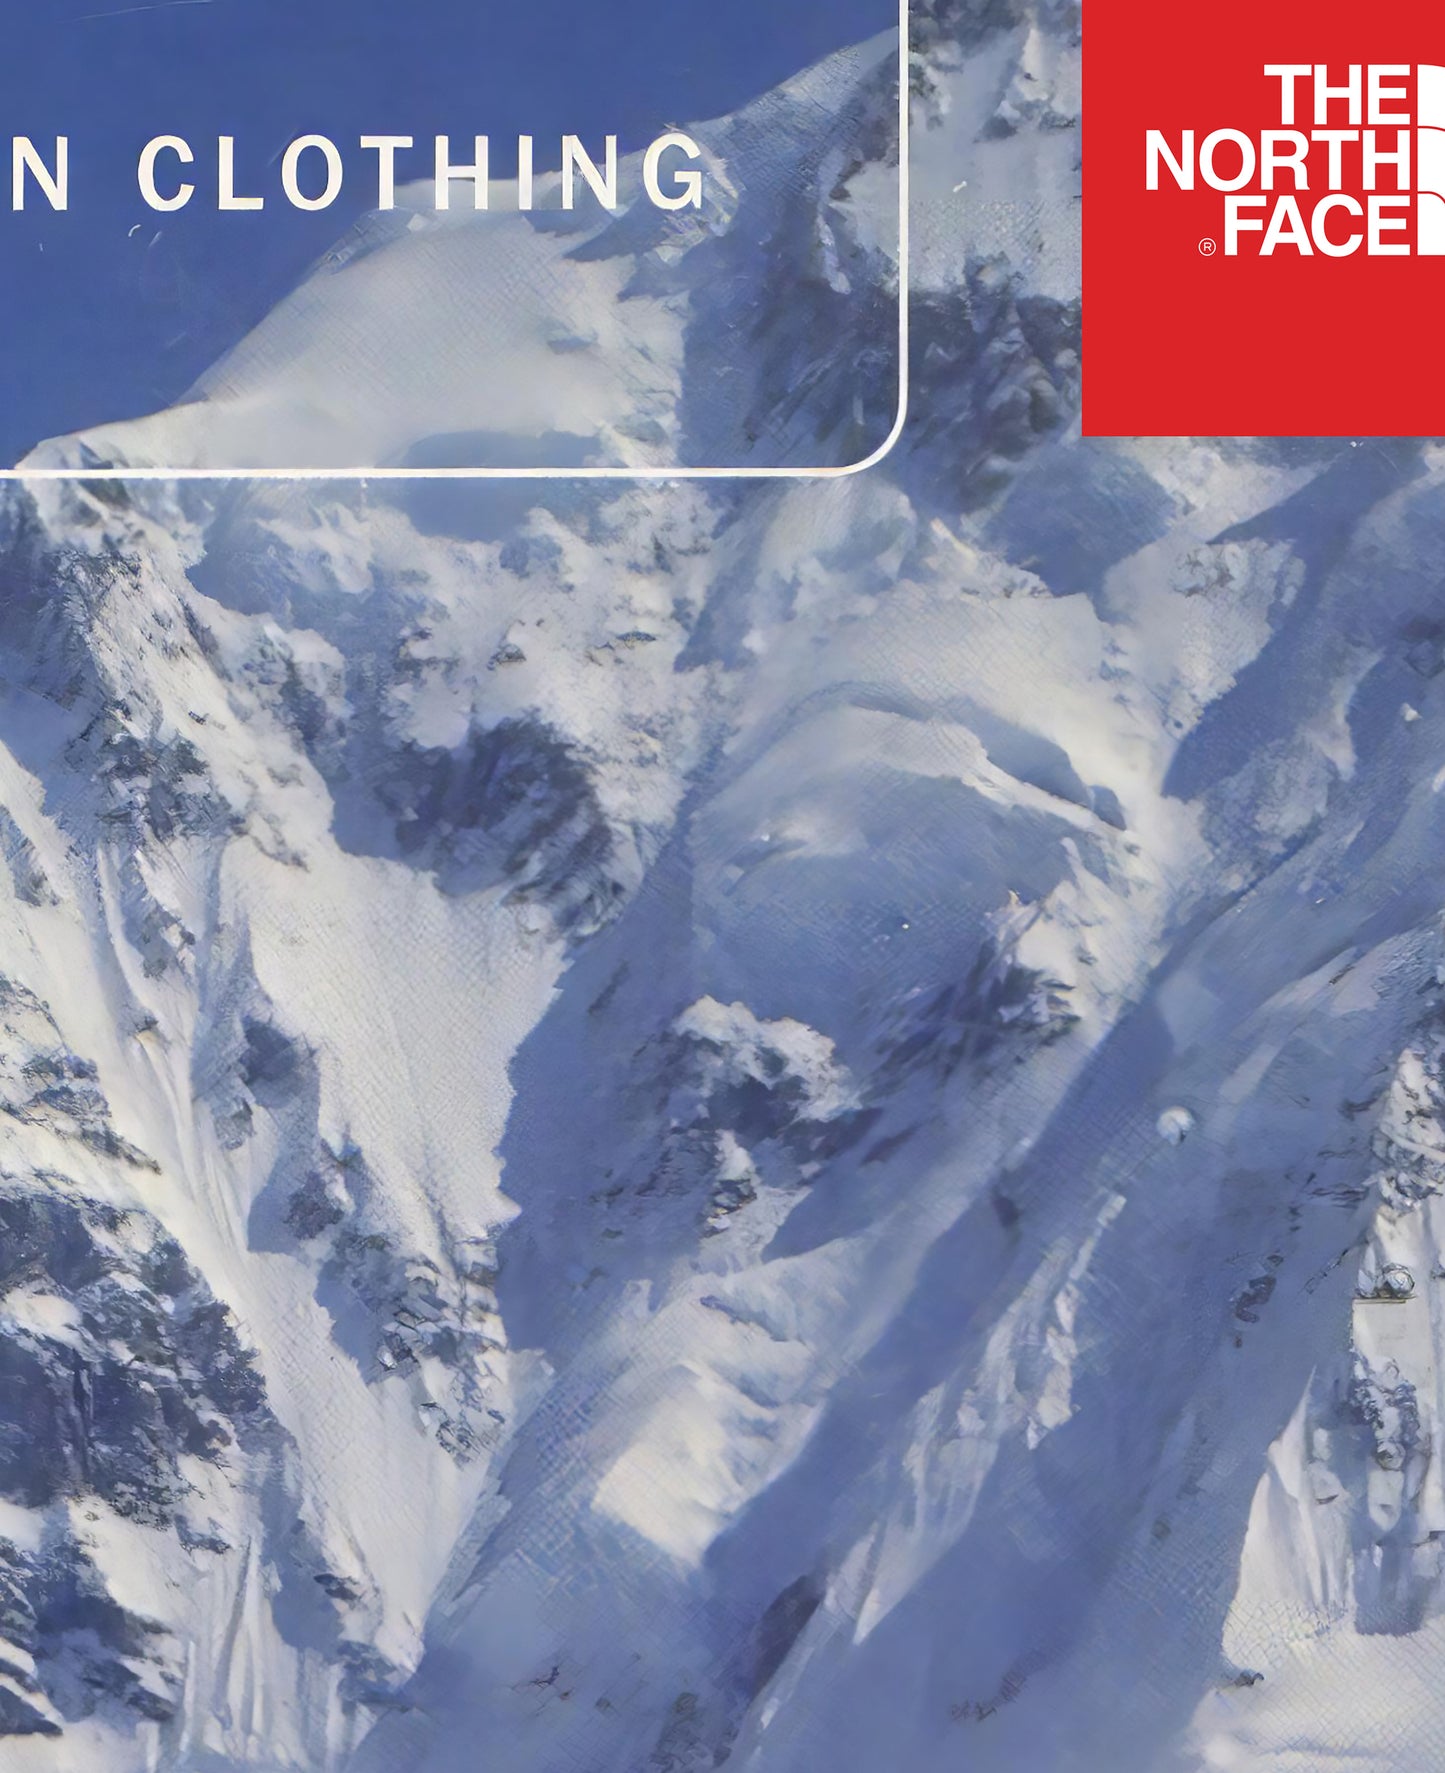 The North Face 2000 Fall Magazine Front Cover Poster